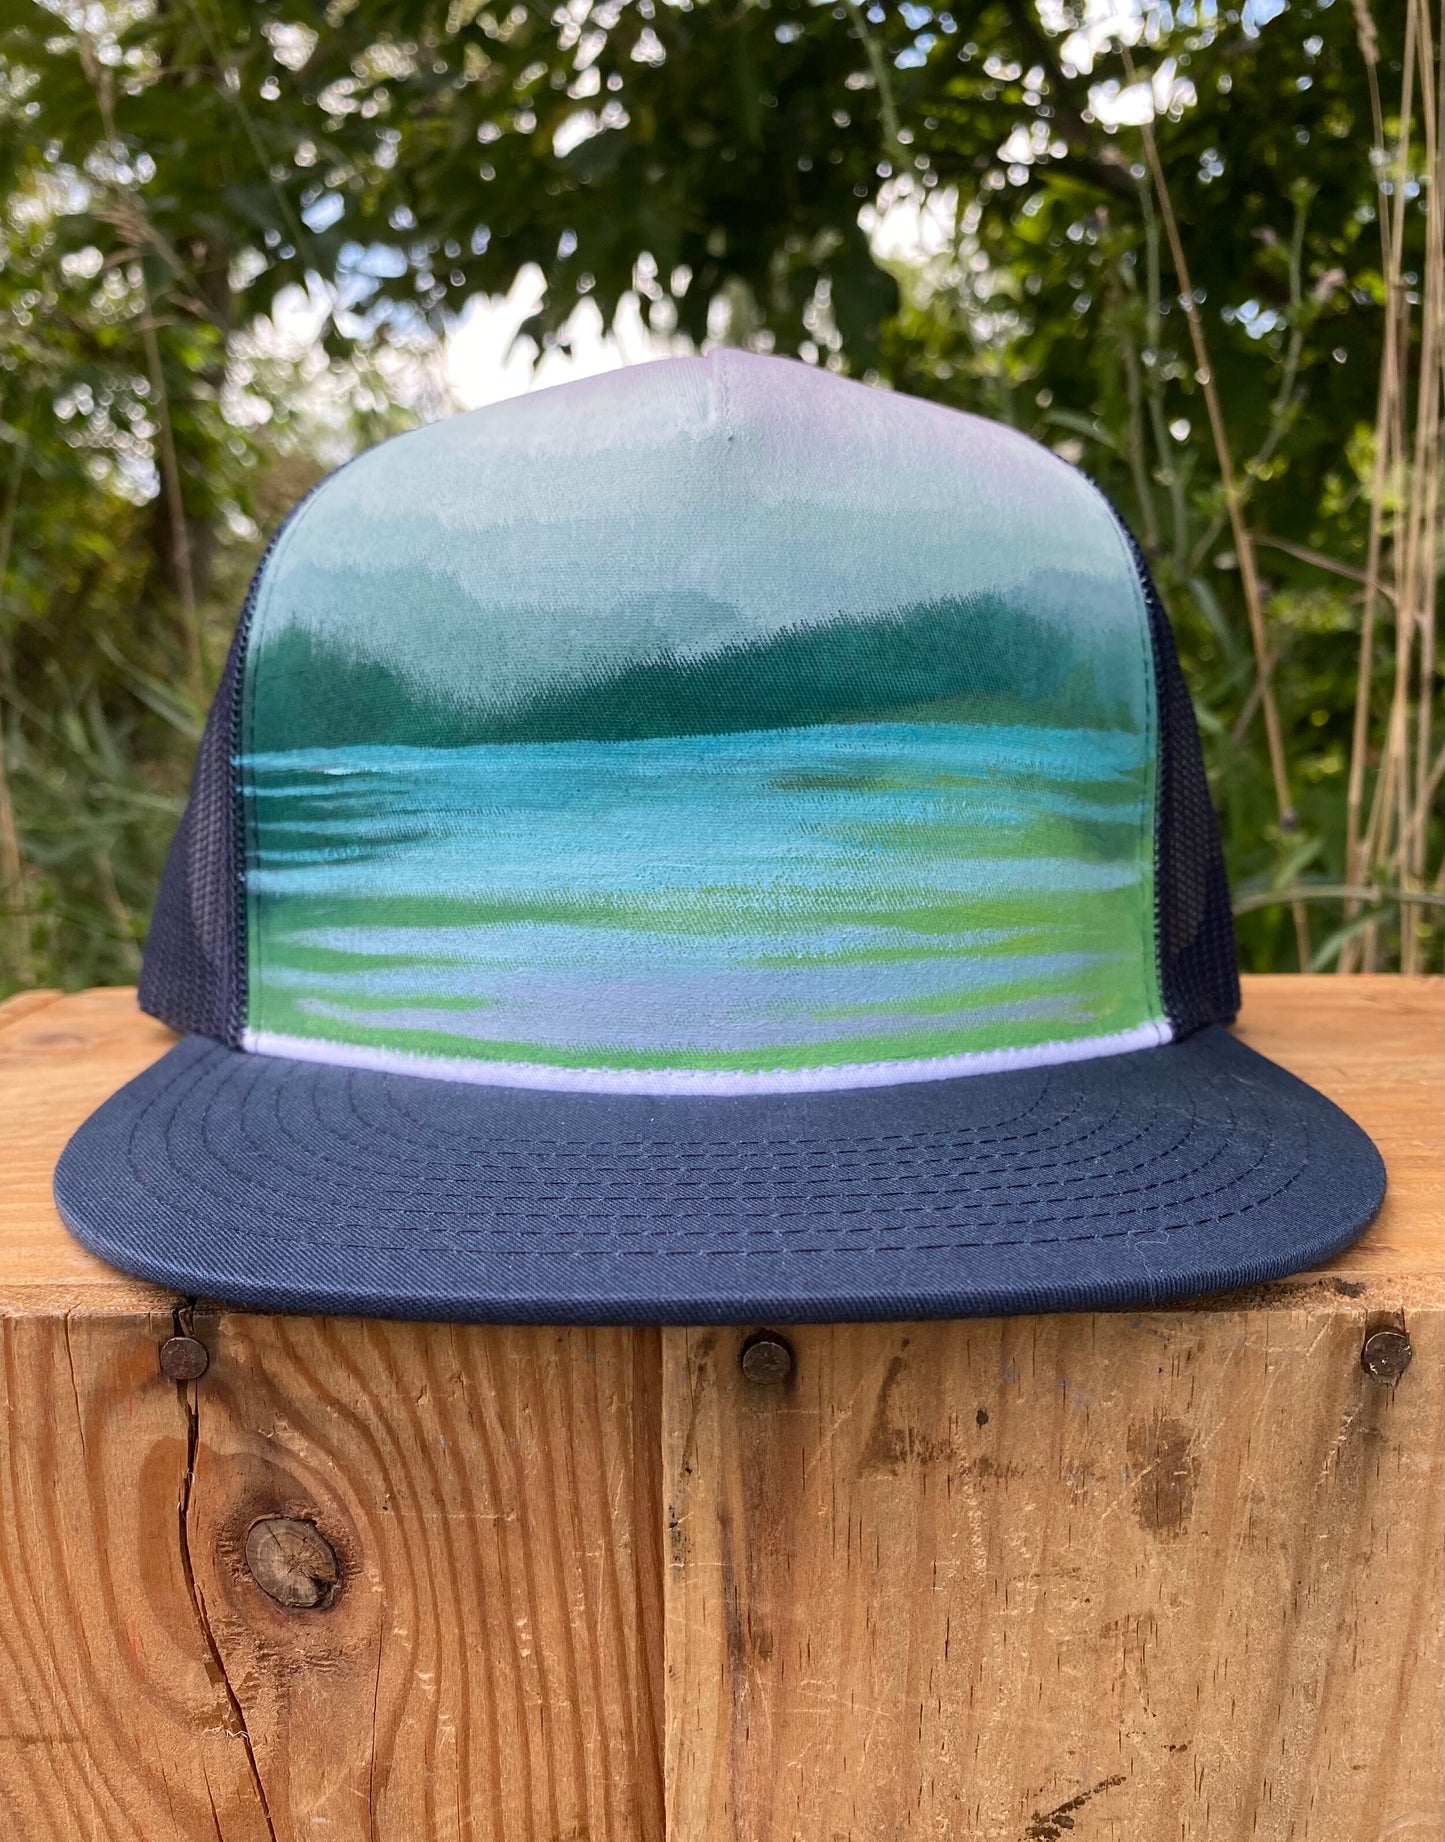 "Still Water" Hand Painted Hat